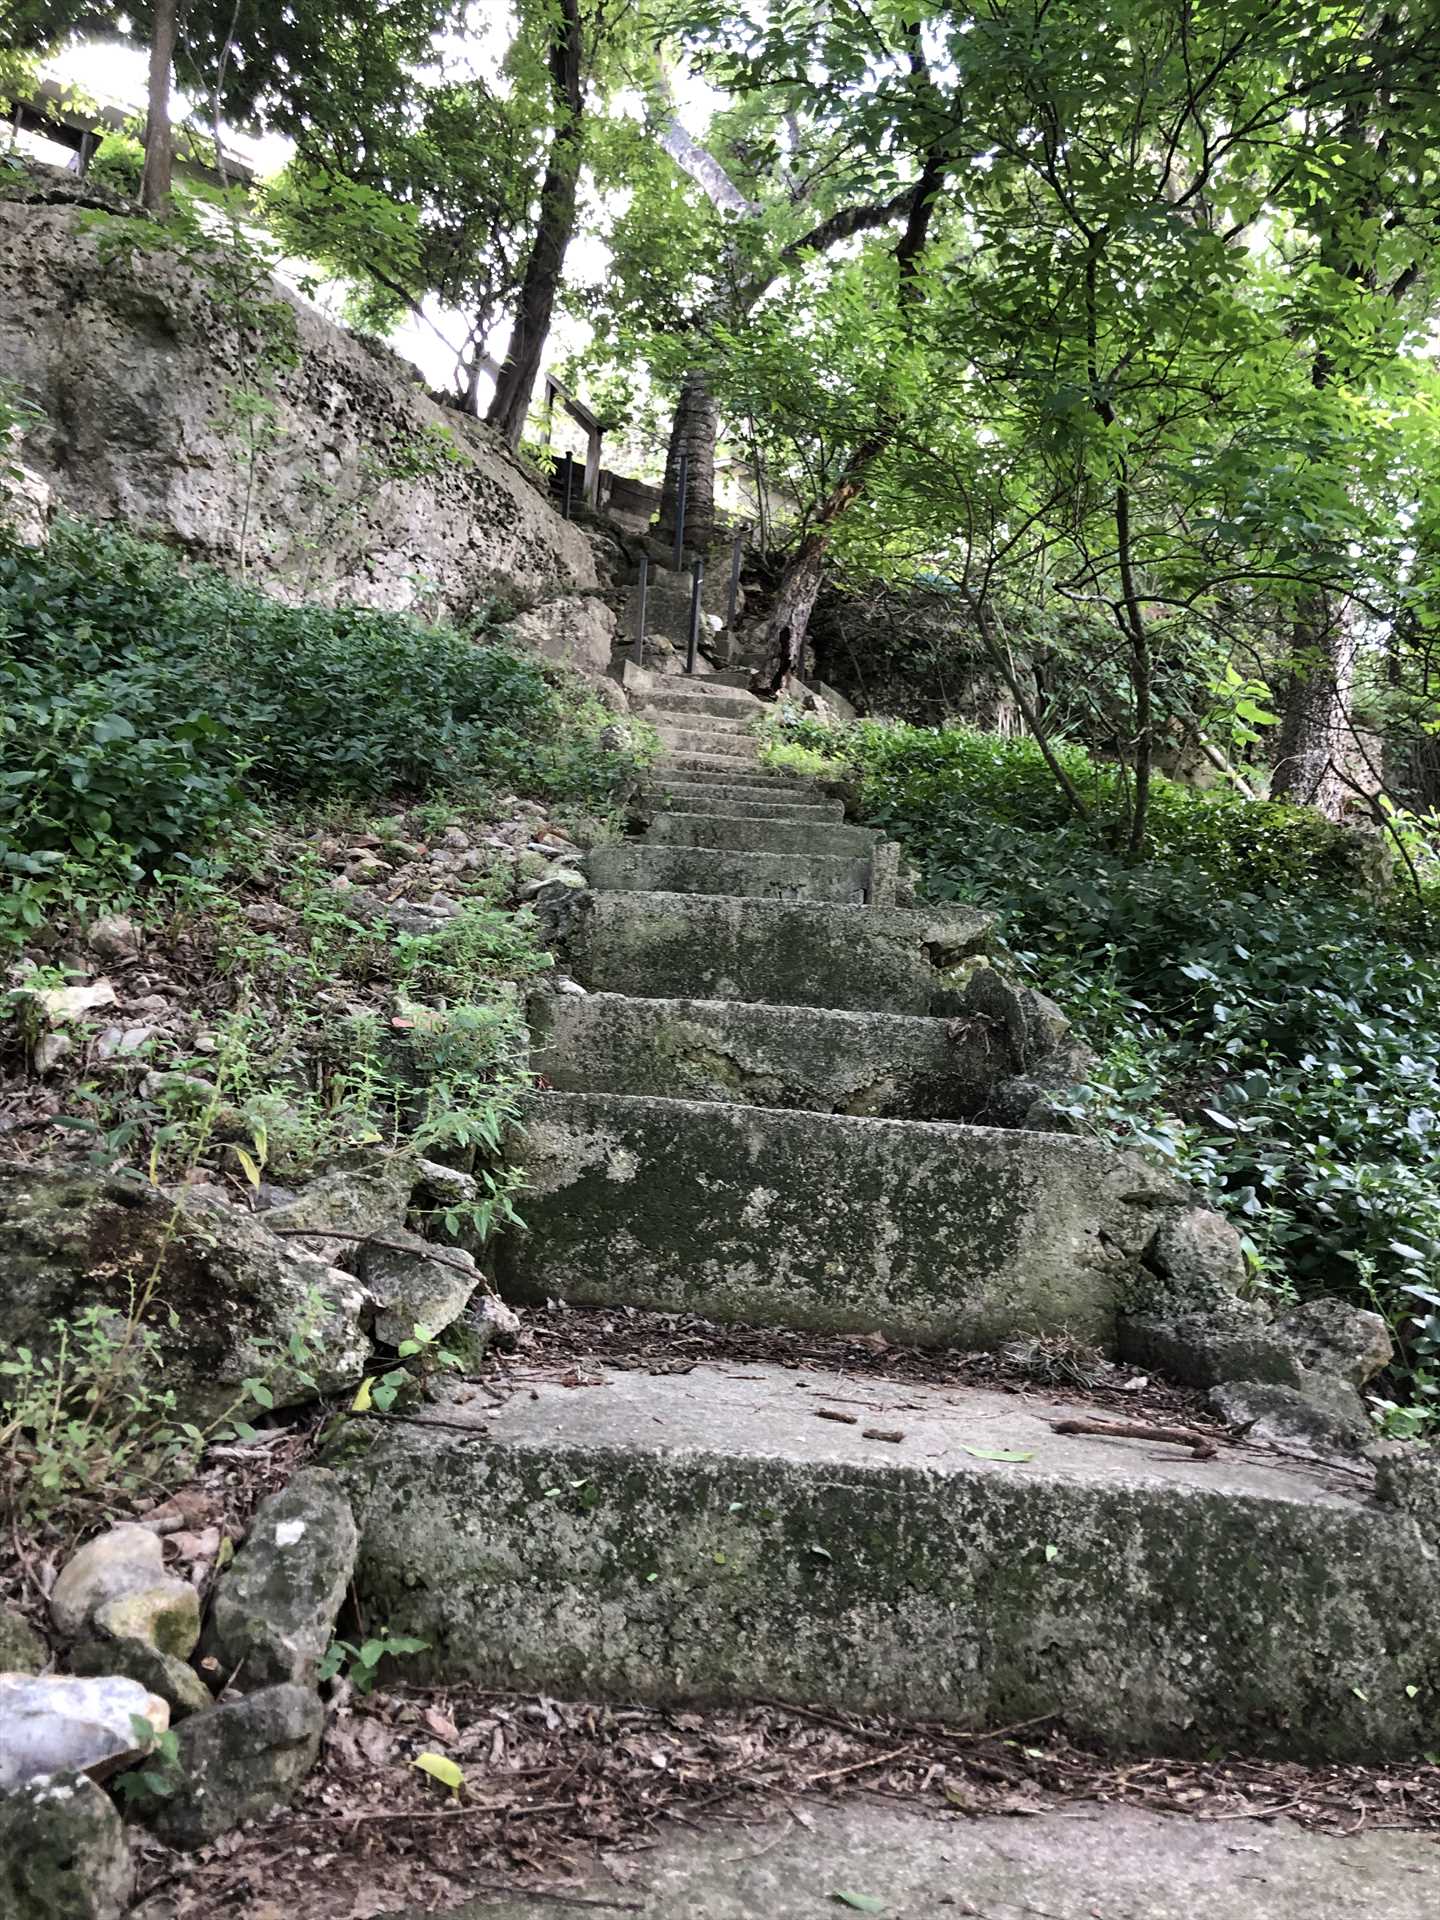                                                 Your adventure on the Medina River begins by descending this scenic staircase.